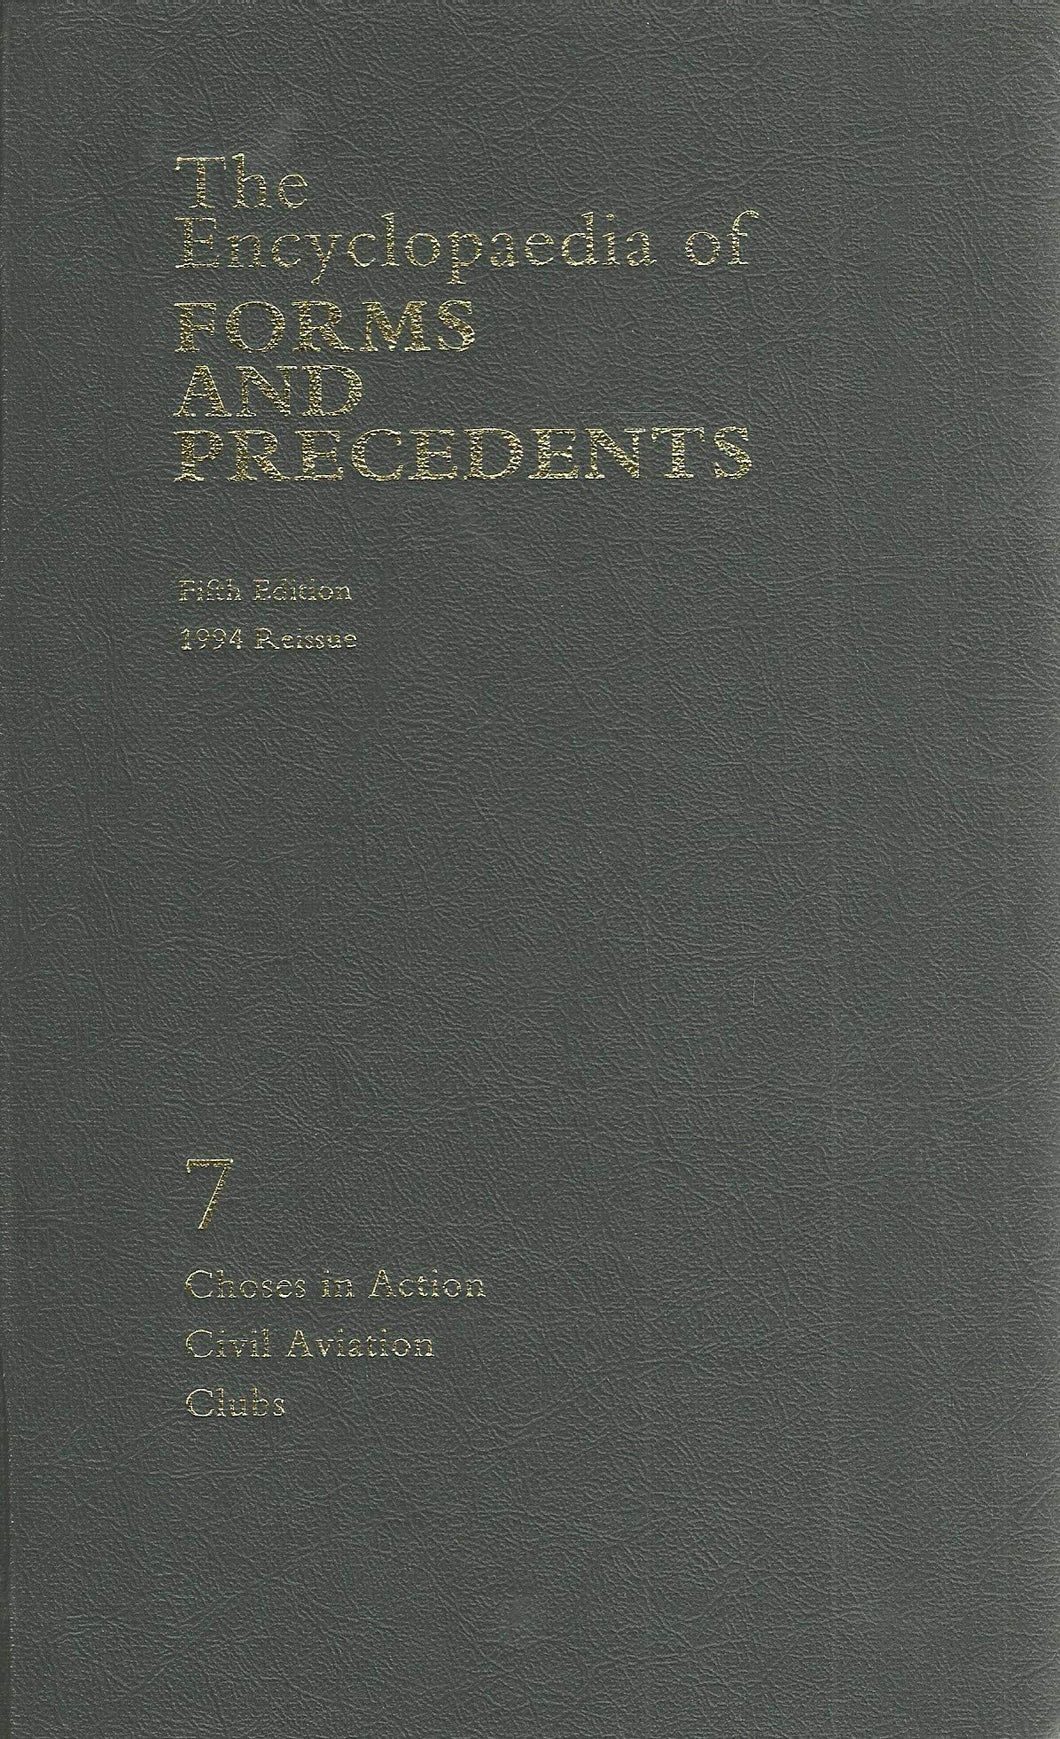 The Encyclopaedia of Forms and Precedents Fifth Edition 1994 Reissue Volume 7: Choses in action, Civil Aviation, Clubs